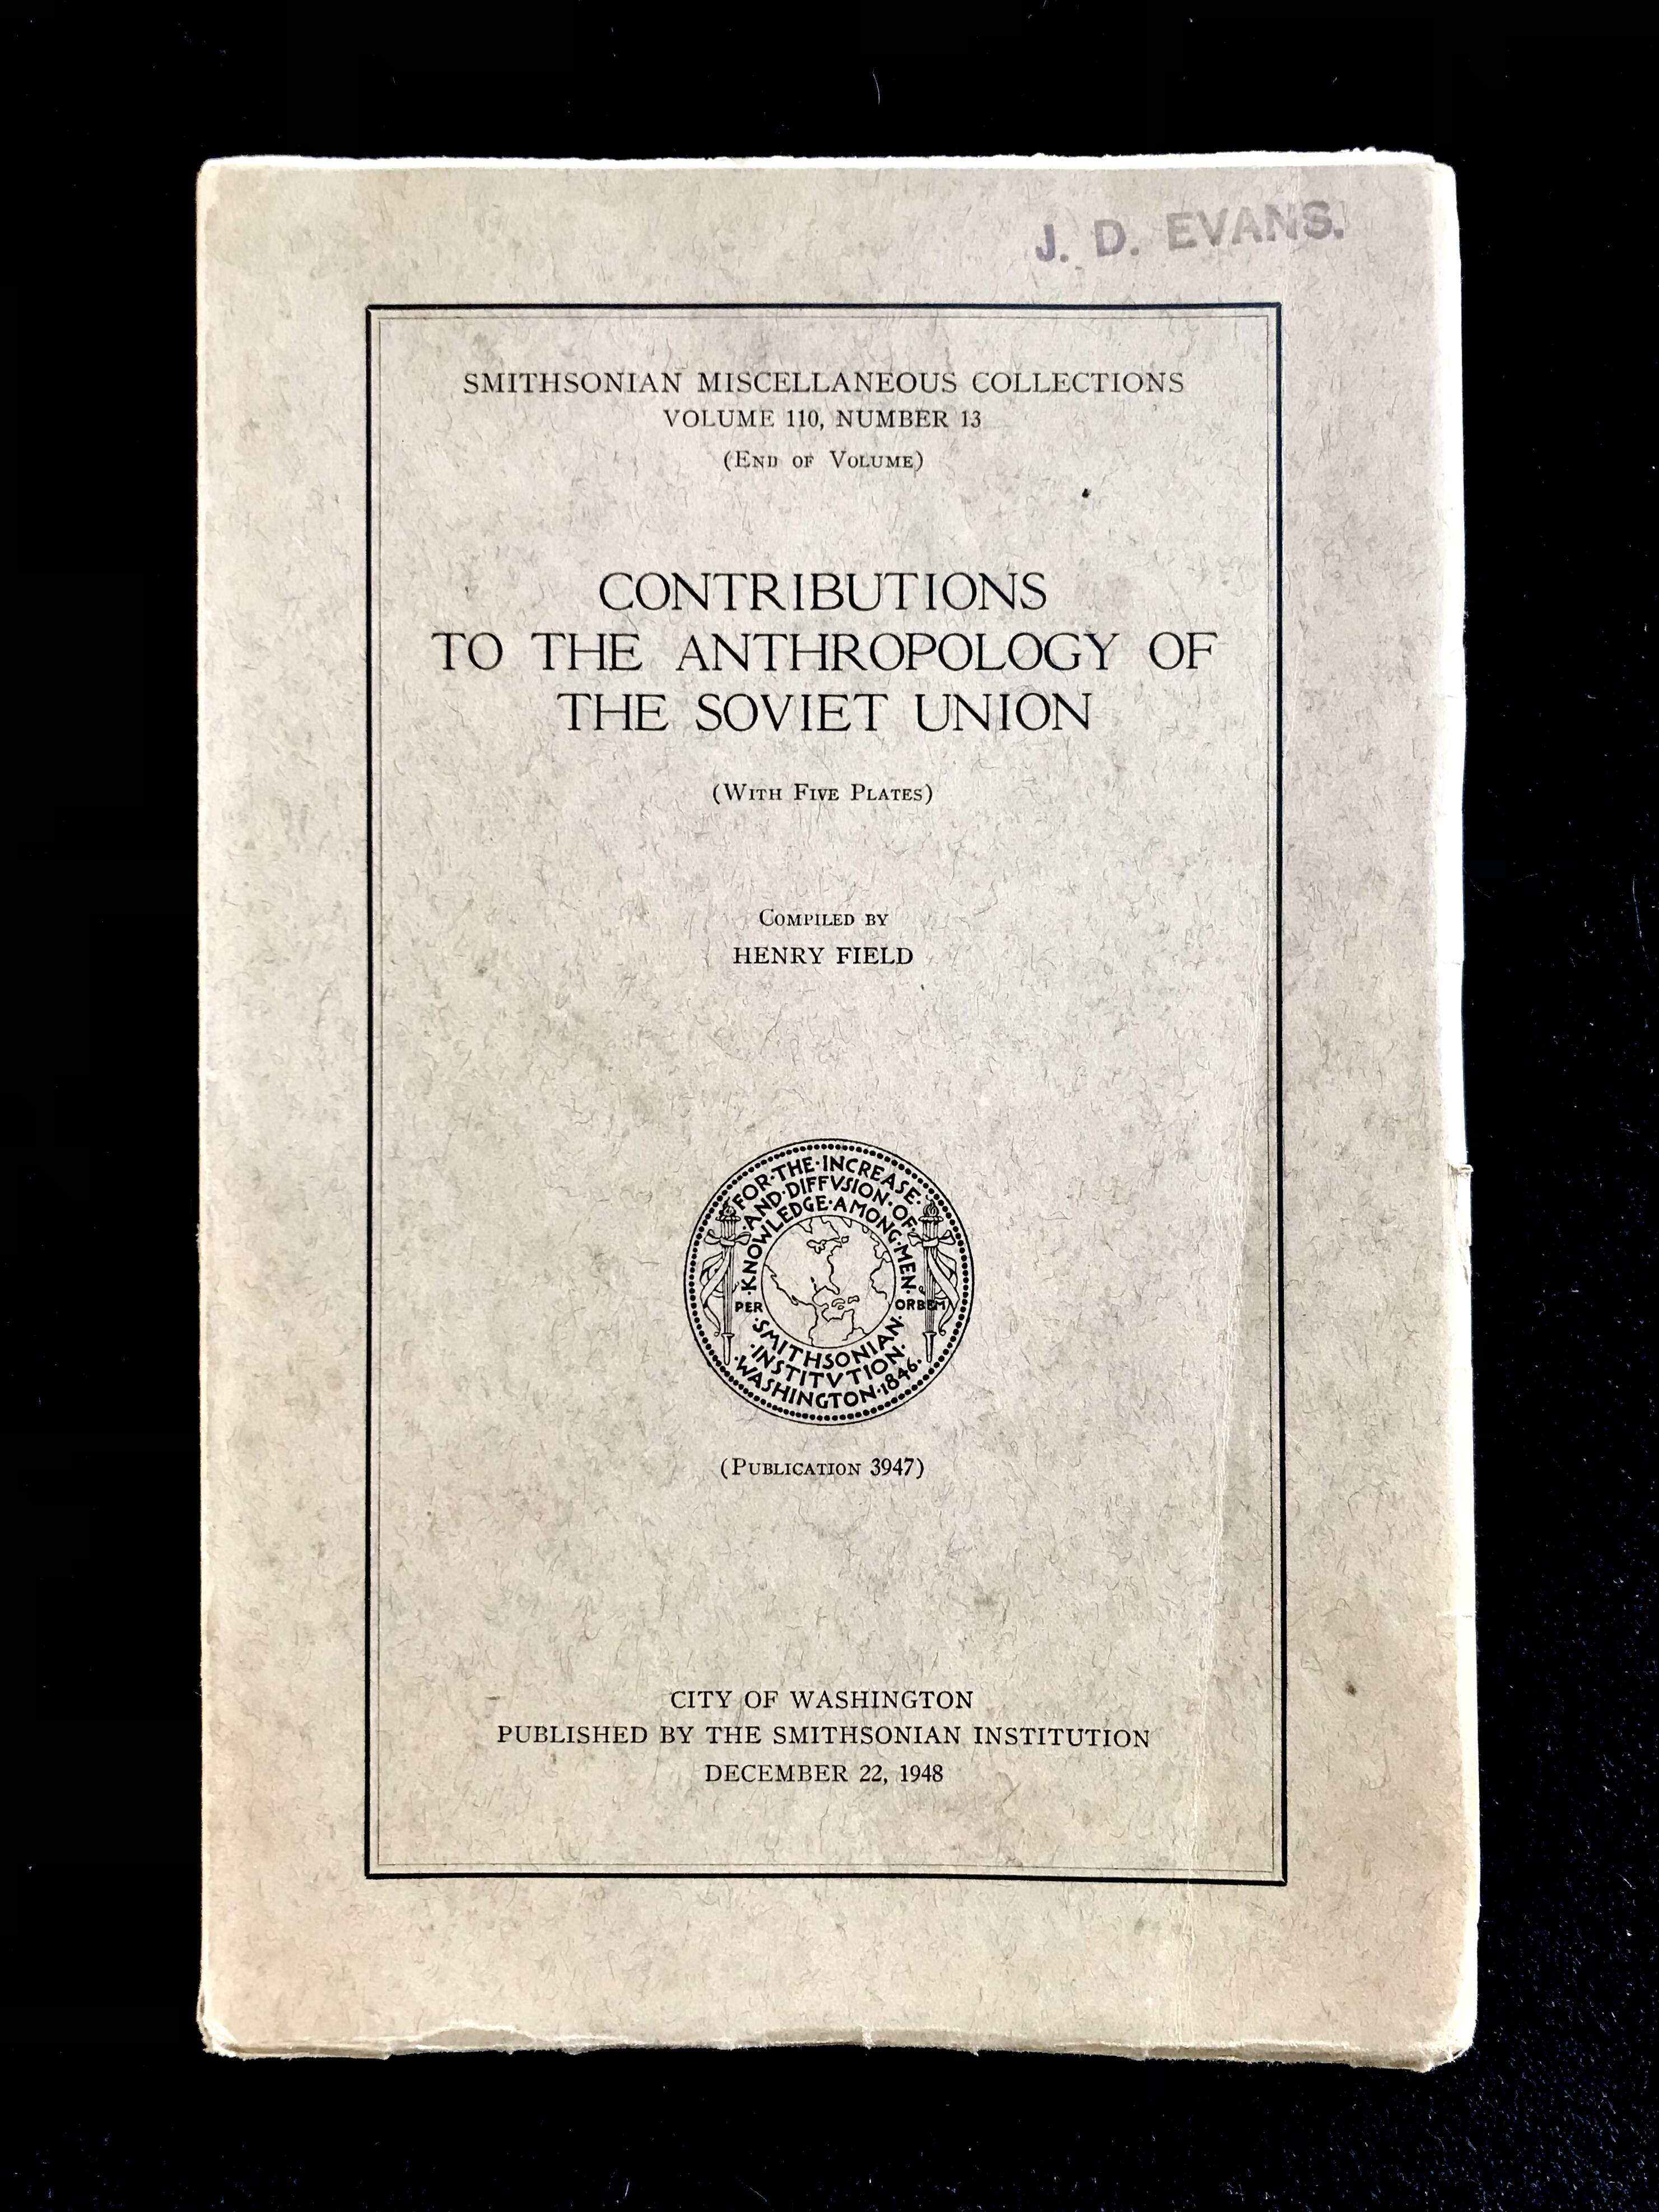 Contributions To The Anthropology Of The Soviet Union Compiled by Henry Field